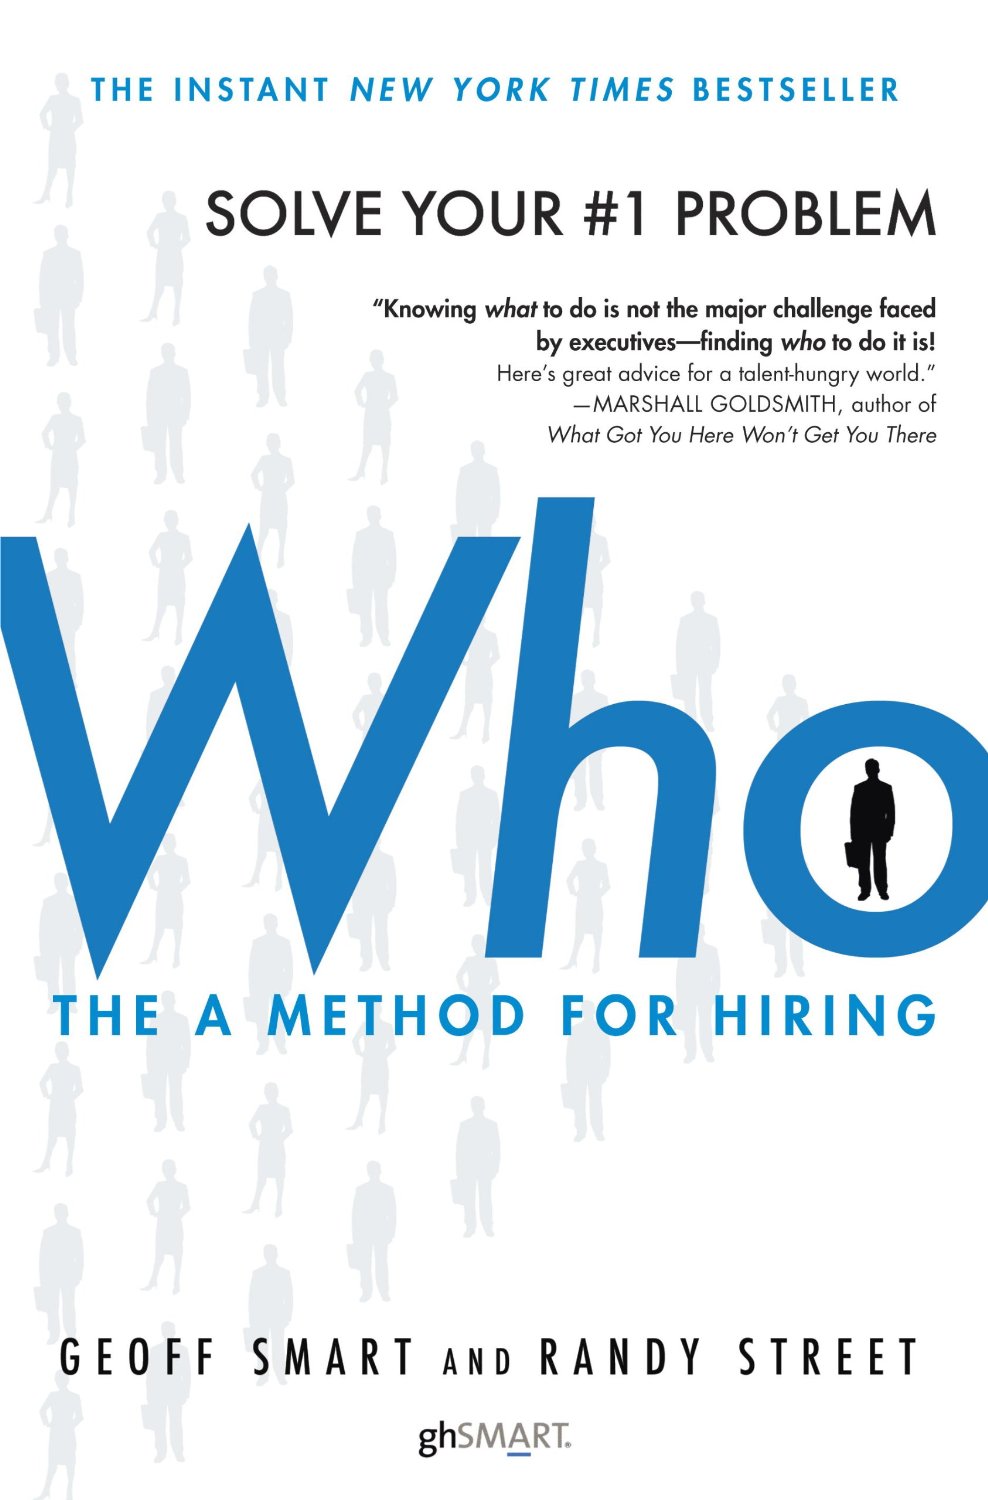 The A Method for Hiring